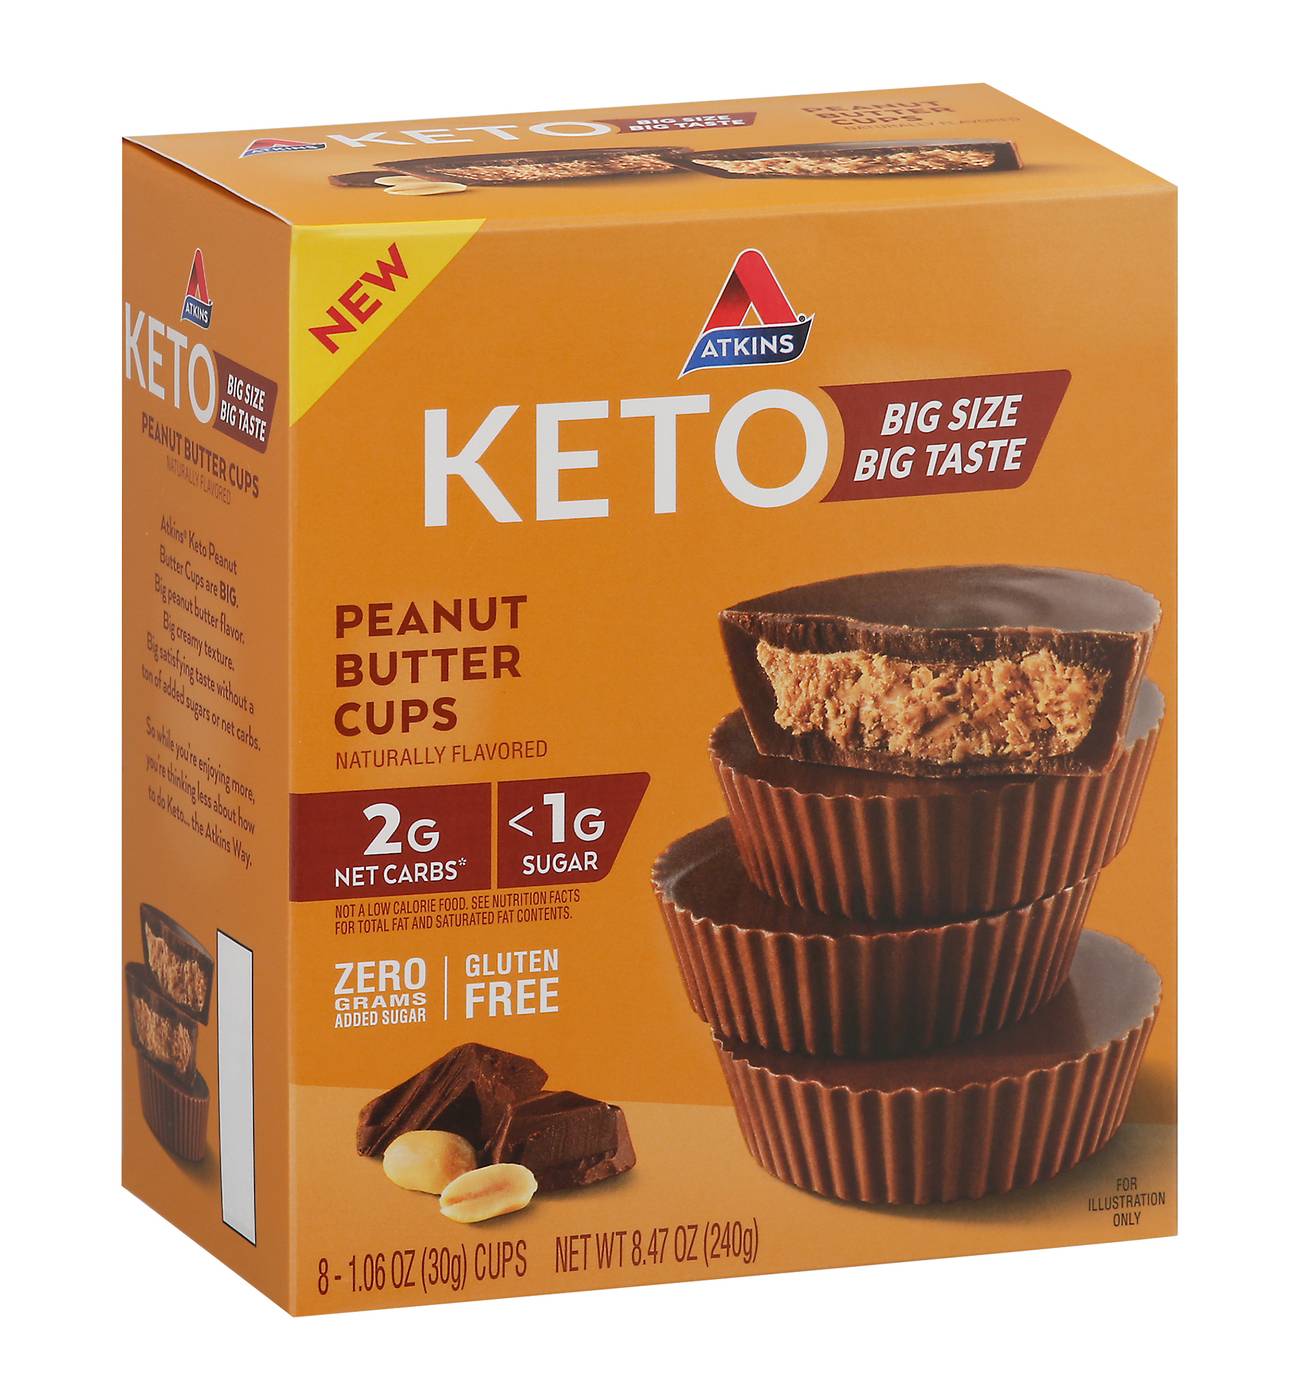 Atkins Keto Peanut Butter Cup; image 2 of 4